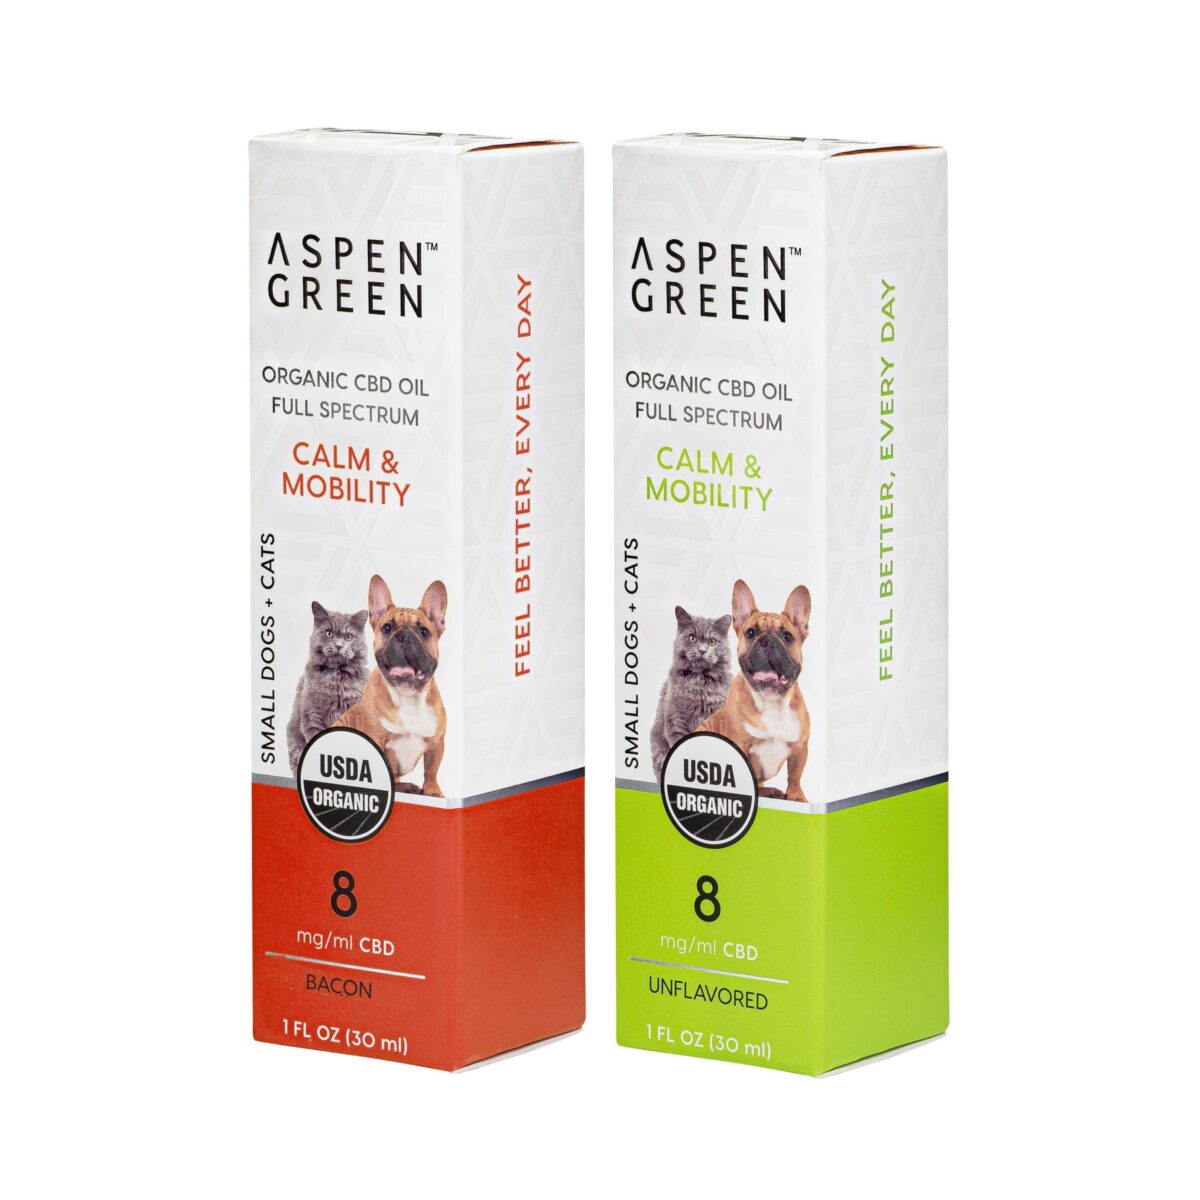 Aspen Green USDA Certified Organic CBD Oil for Small Dogs & Cats Boxes, Calm and Mobility, Variety Flavor